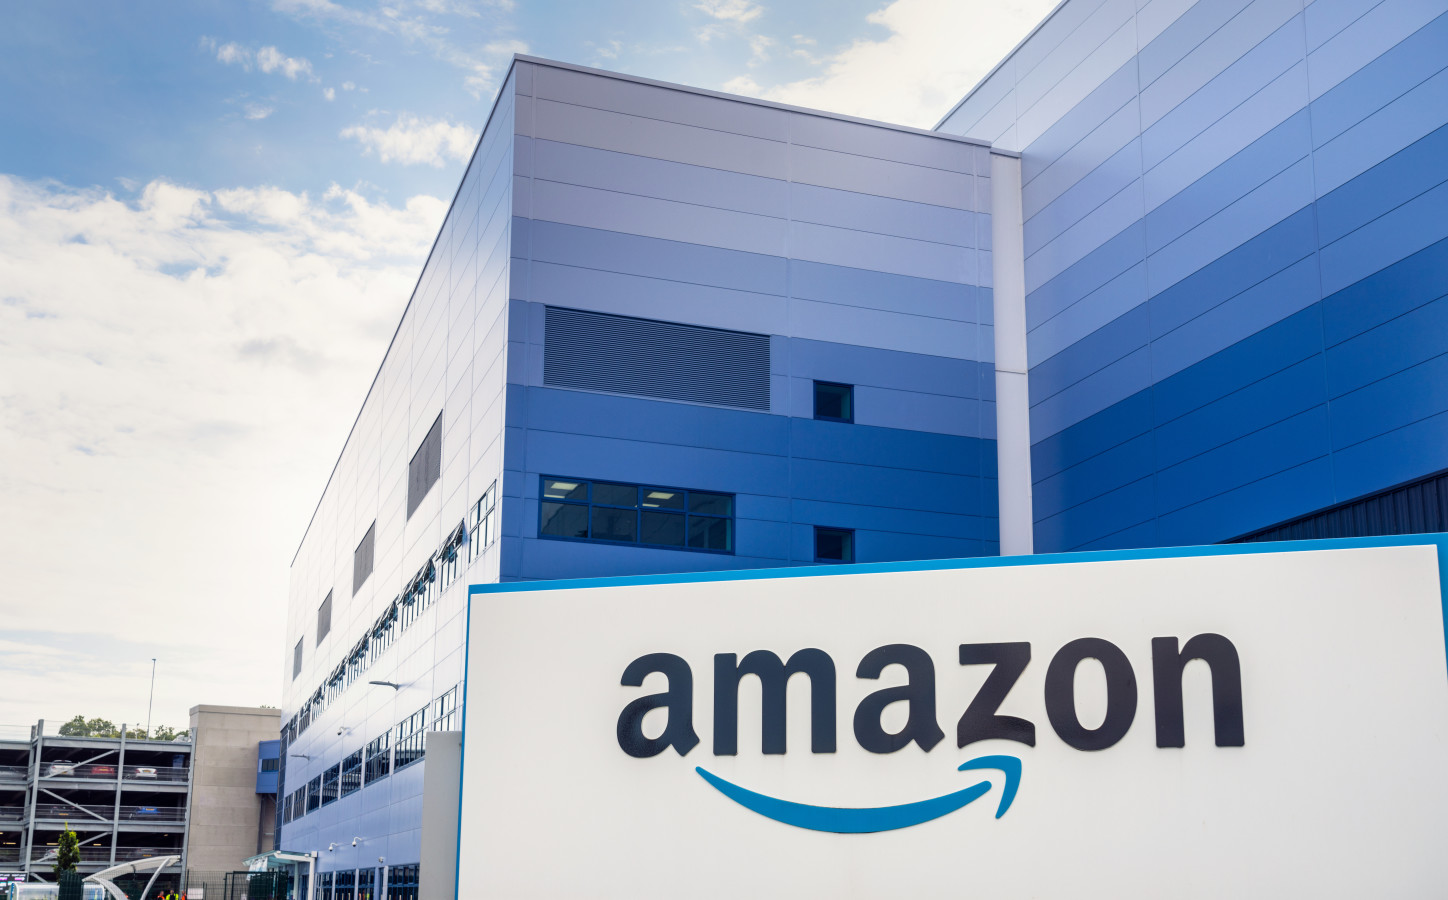 Internet: Amazon will invest 120 million dollars for a satellite factory